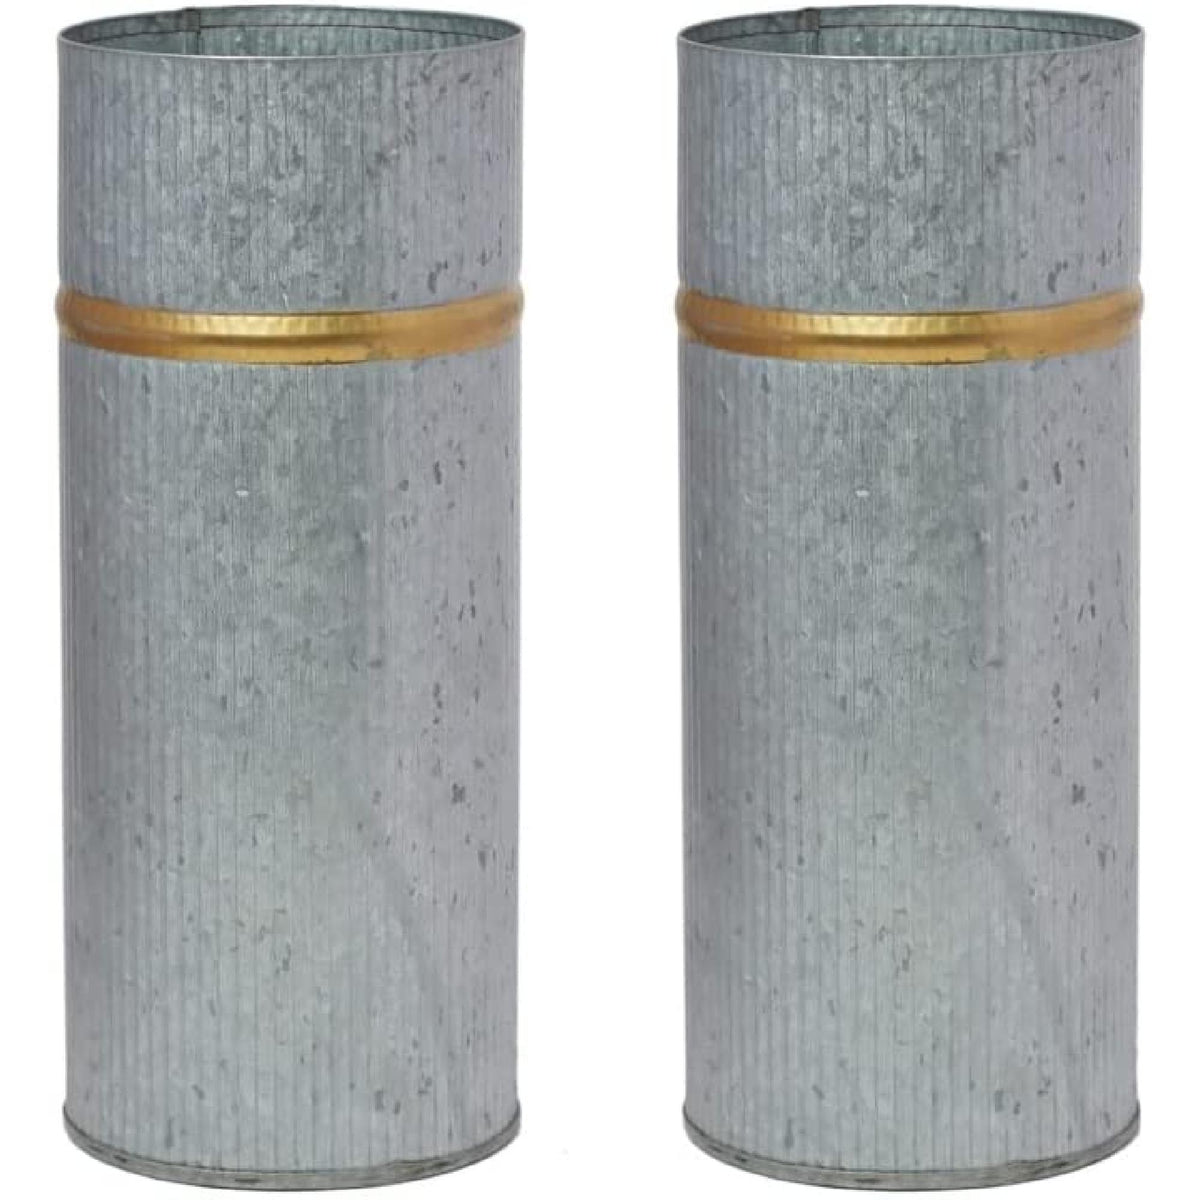 HOSLEY® Galvanized Vases with Gold Rim,  Set of 2,  10 inches High each